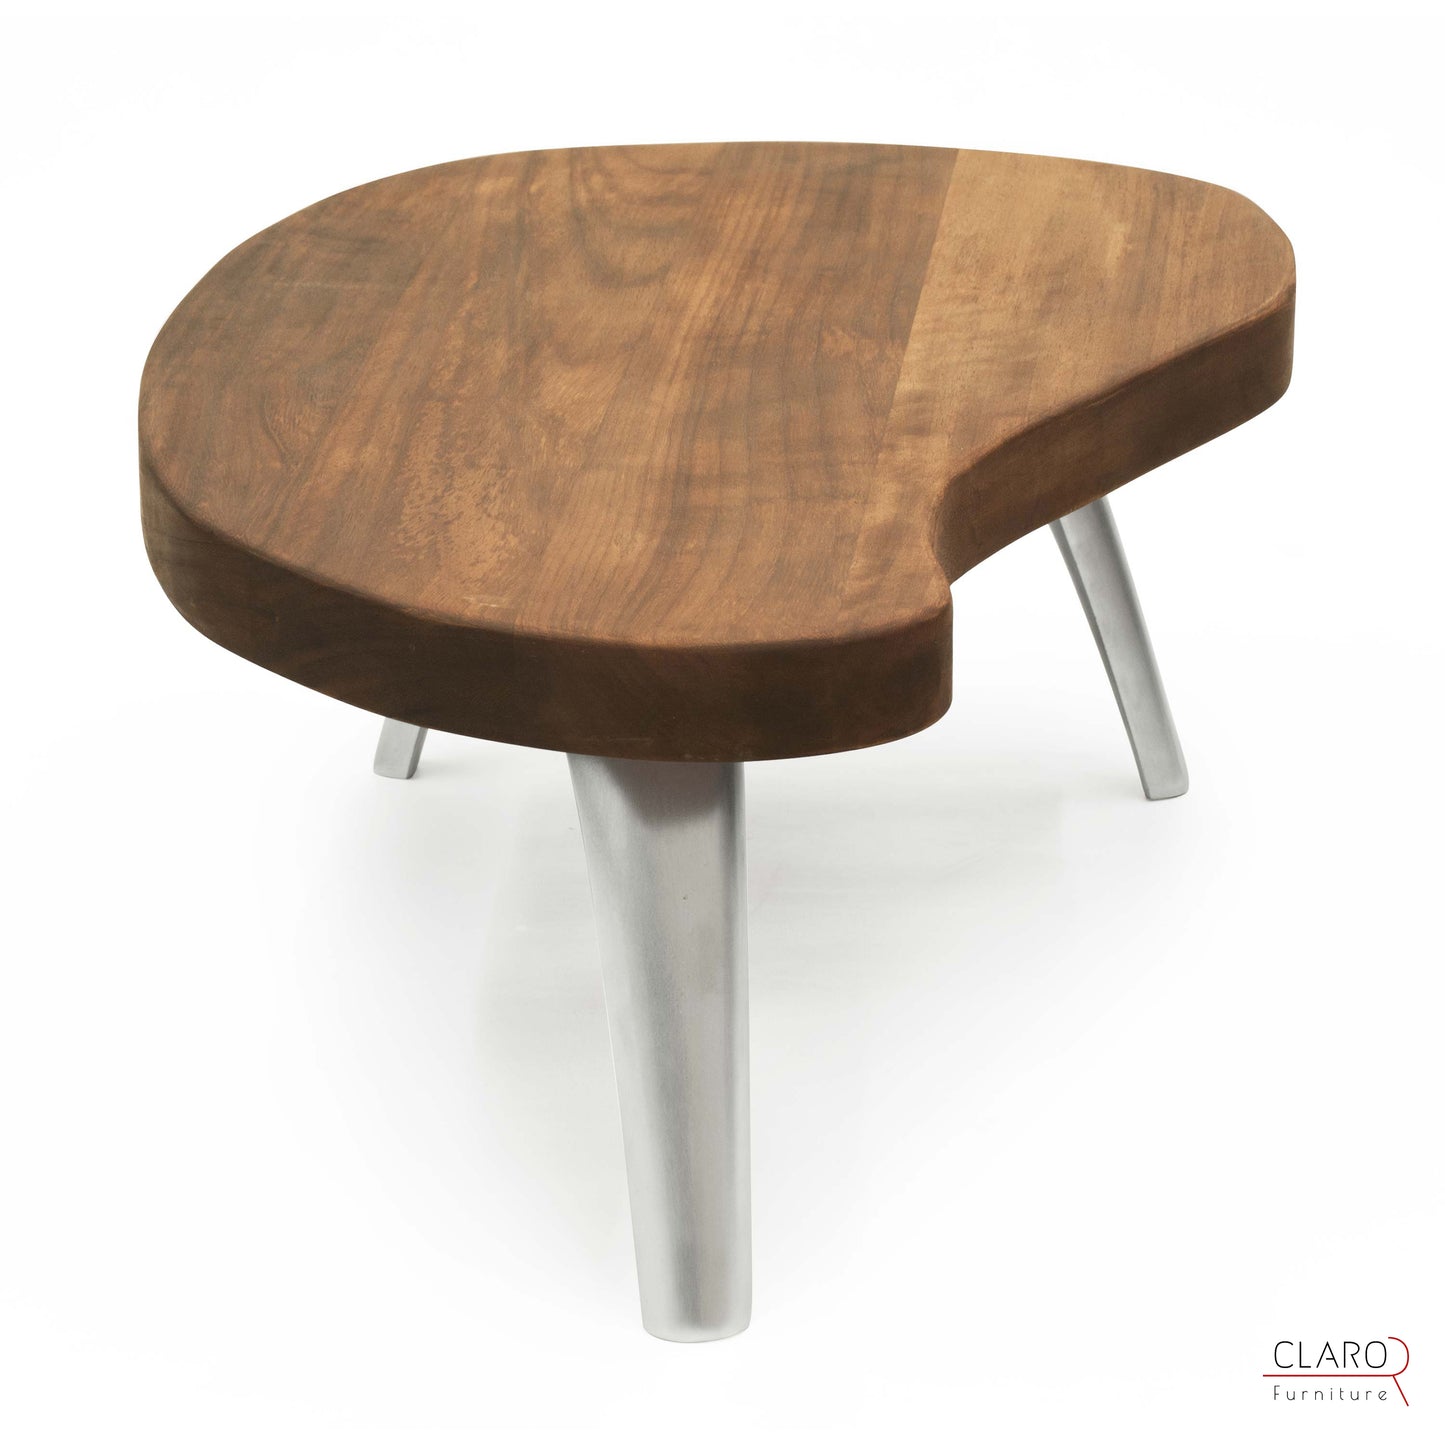 Solid Iroko Wood Coffee Table with Cast Aluminum Legs